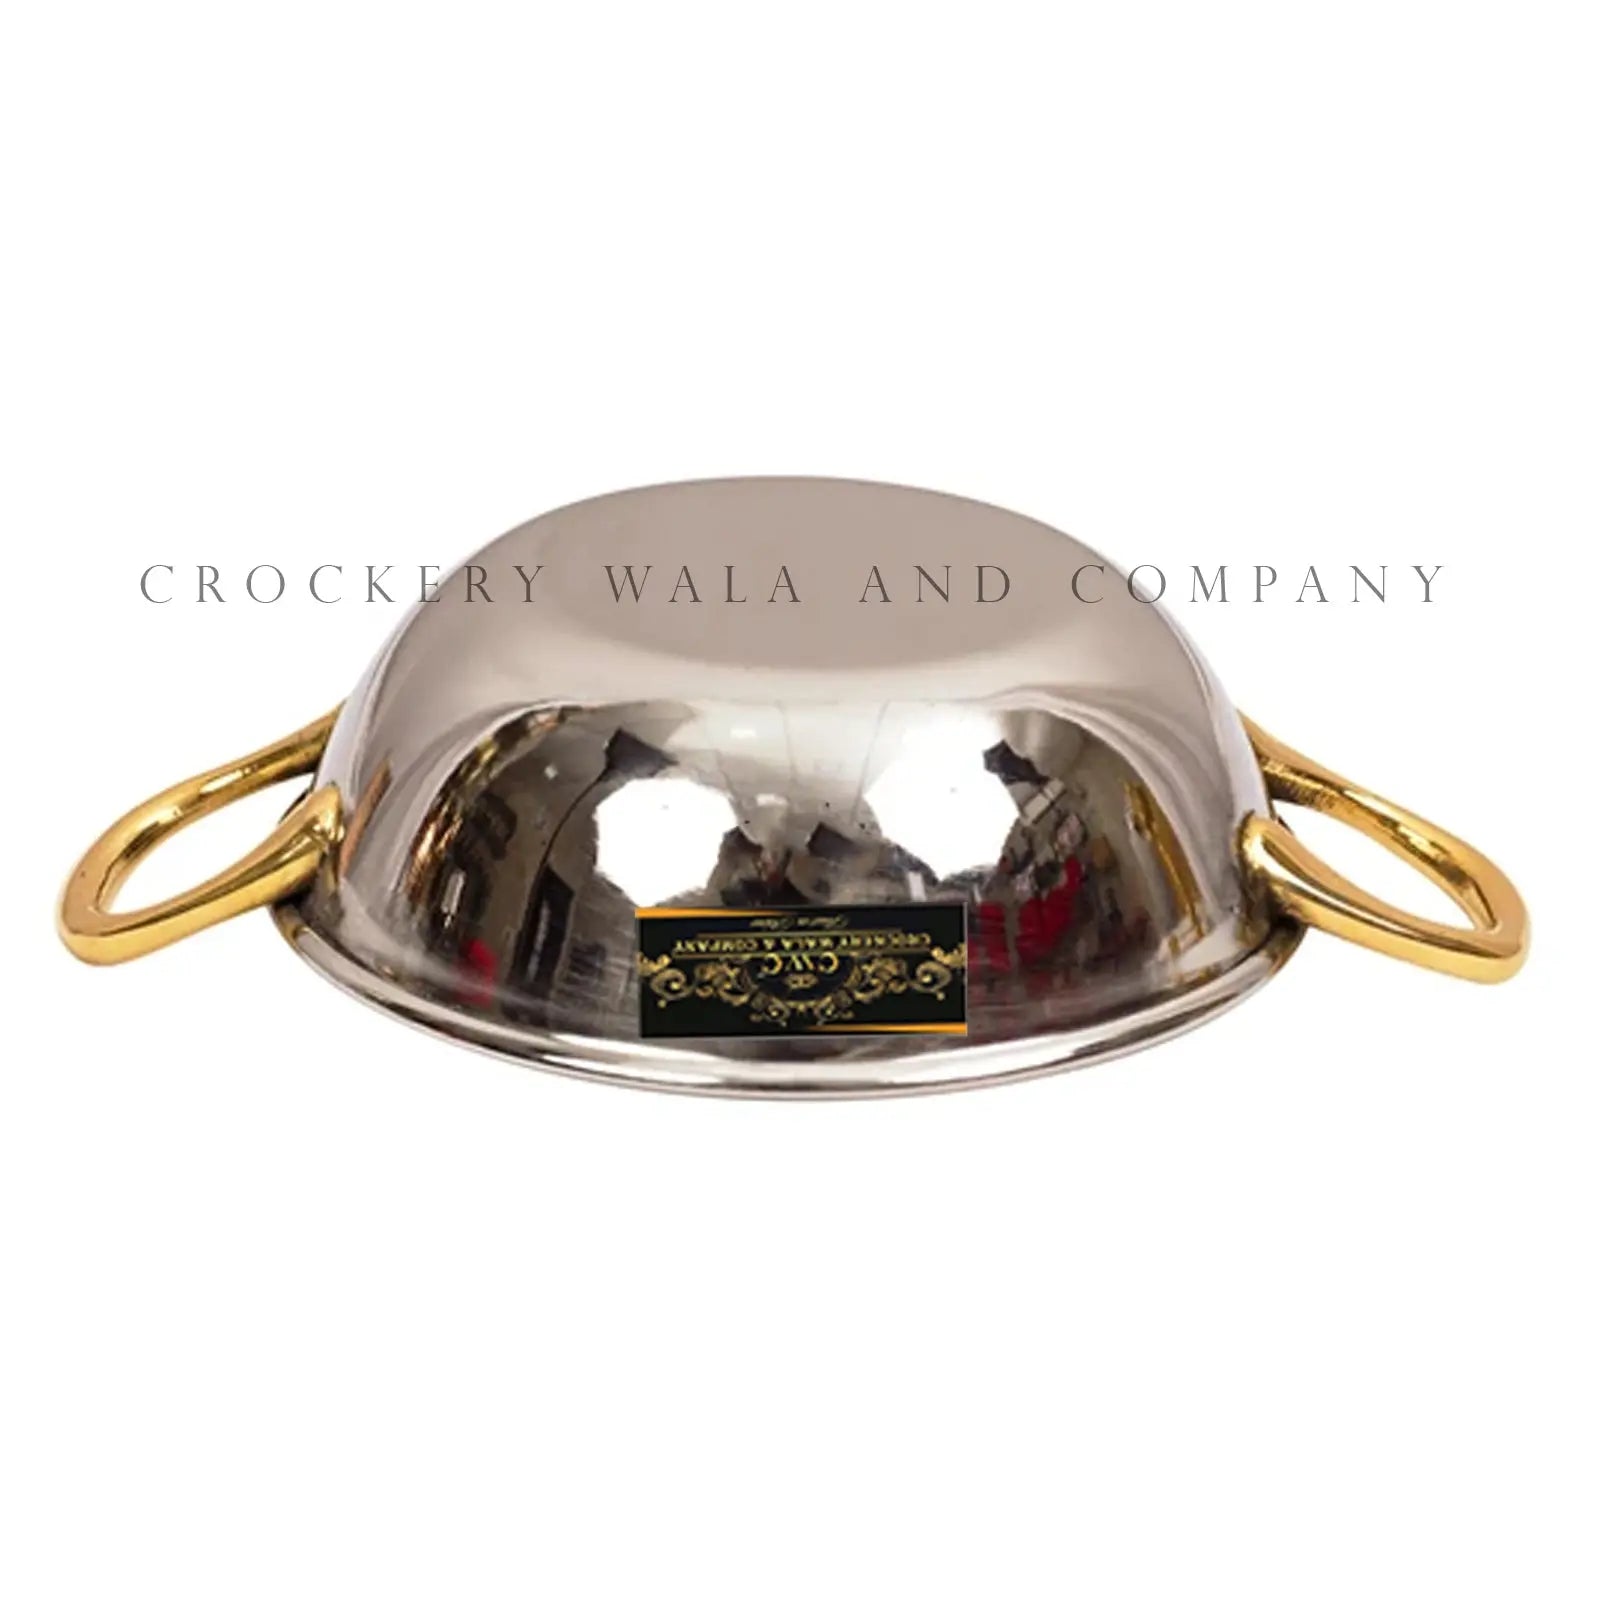 Crockery Wala And Company Stainless Steel Kadhai Bowl With Brass Handles For Serving Gravy, Curries 400 ML - CROCKERY WALA AND COMPANY 